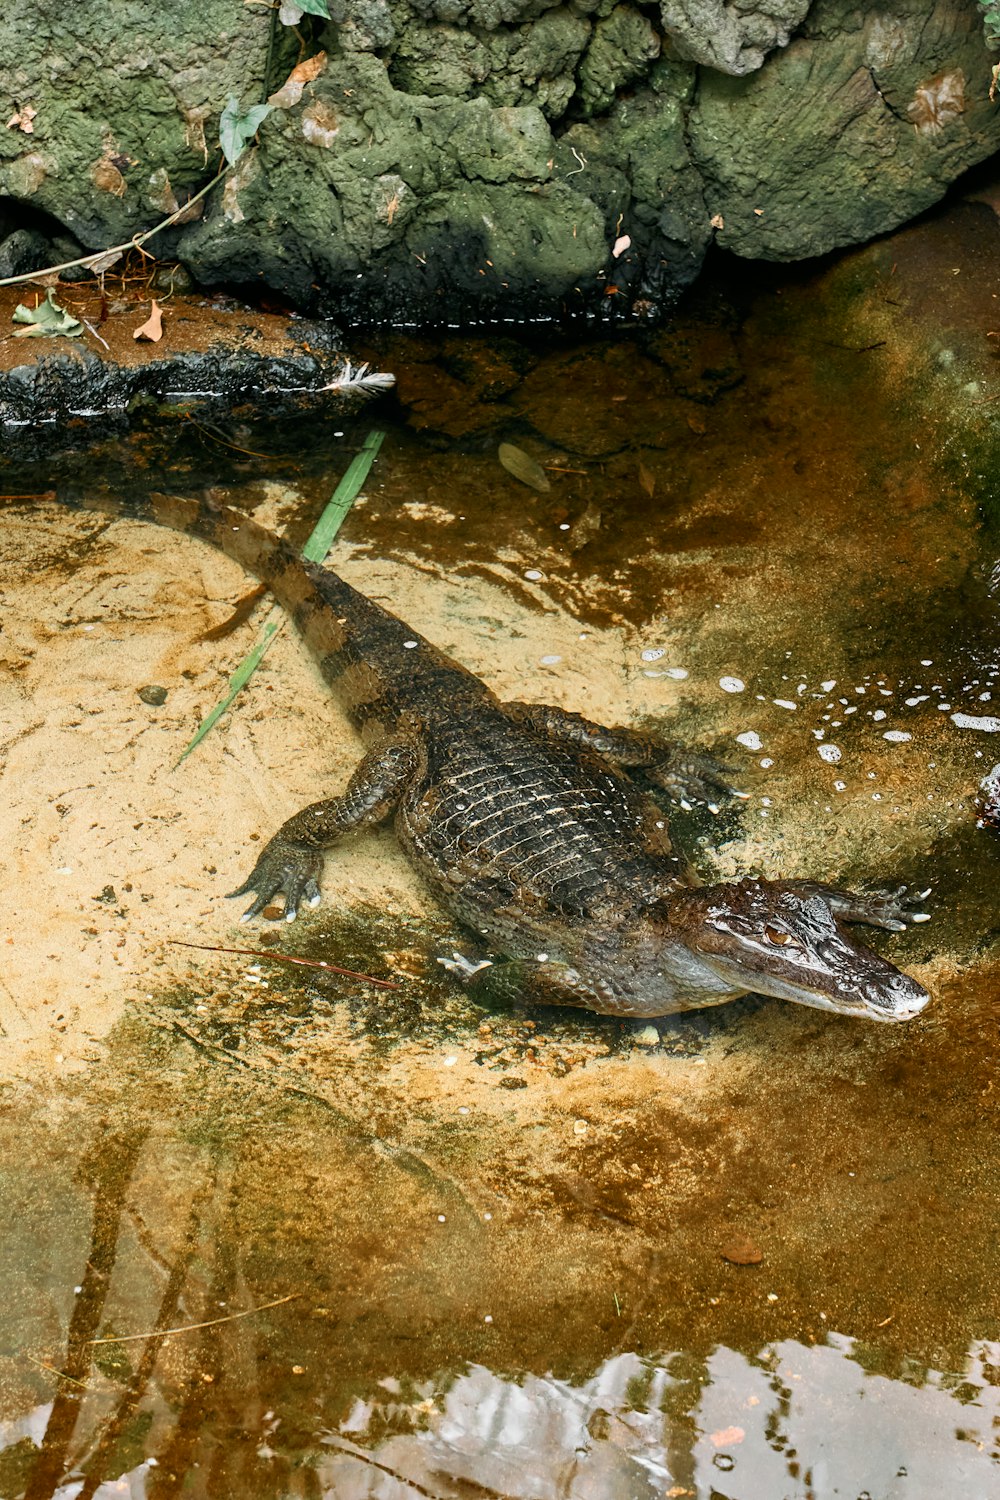 a large alligator laying on top of a body of water